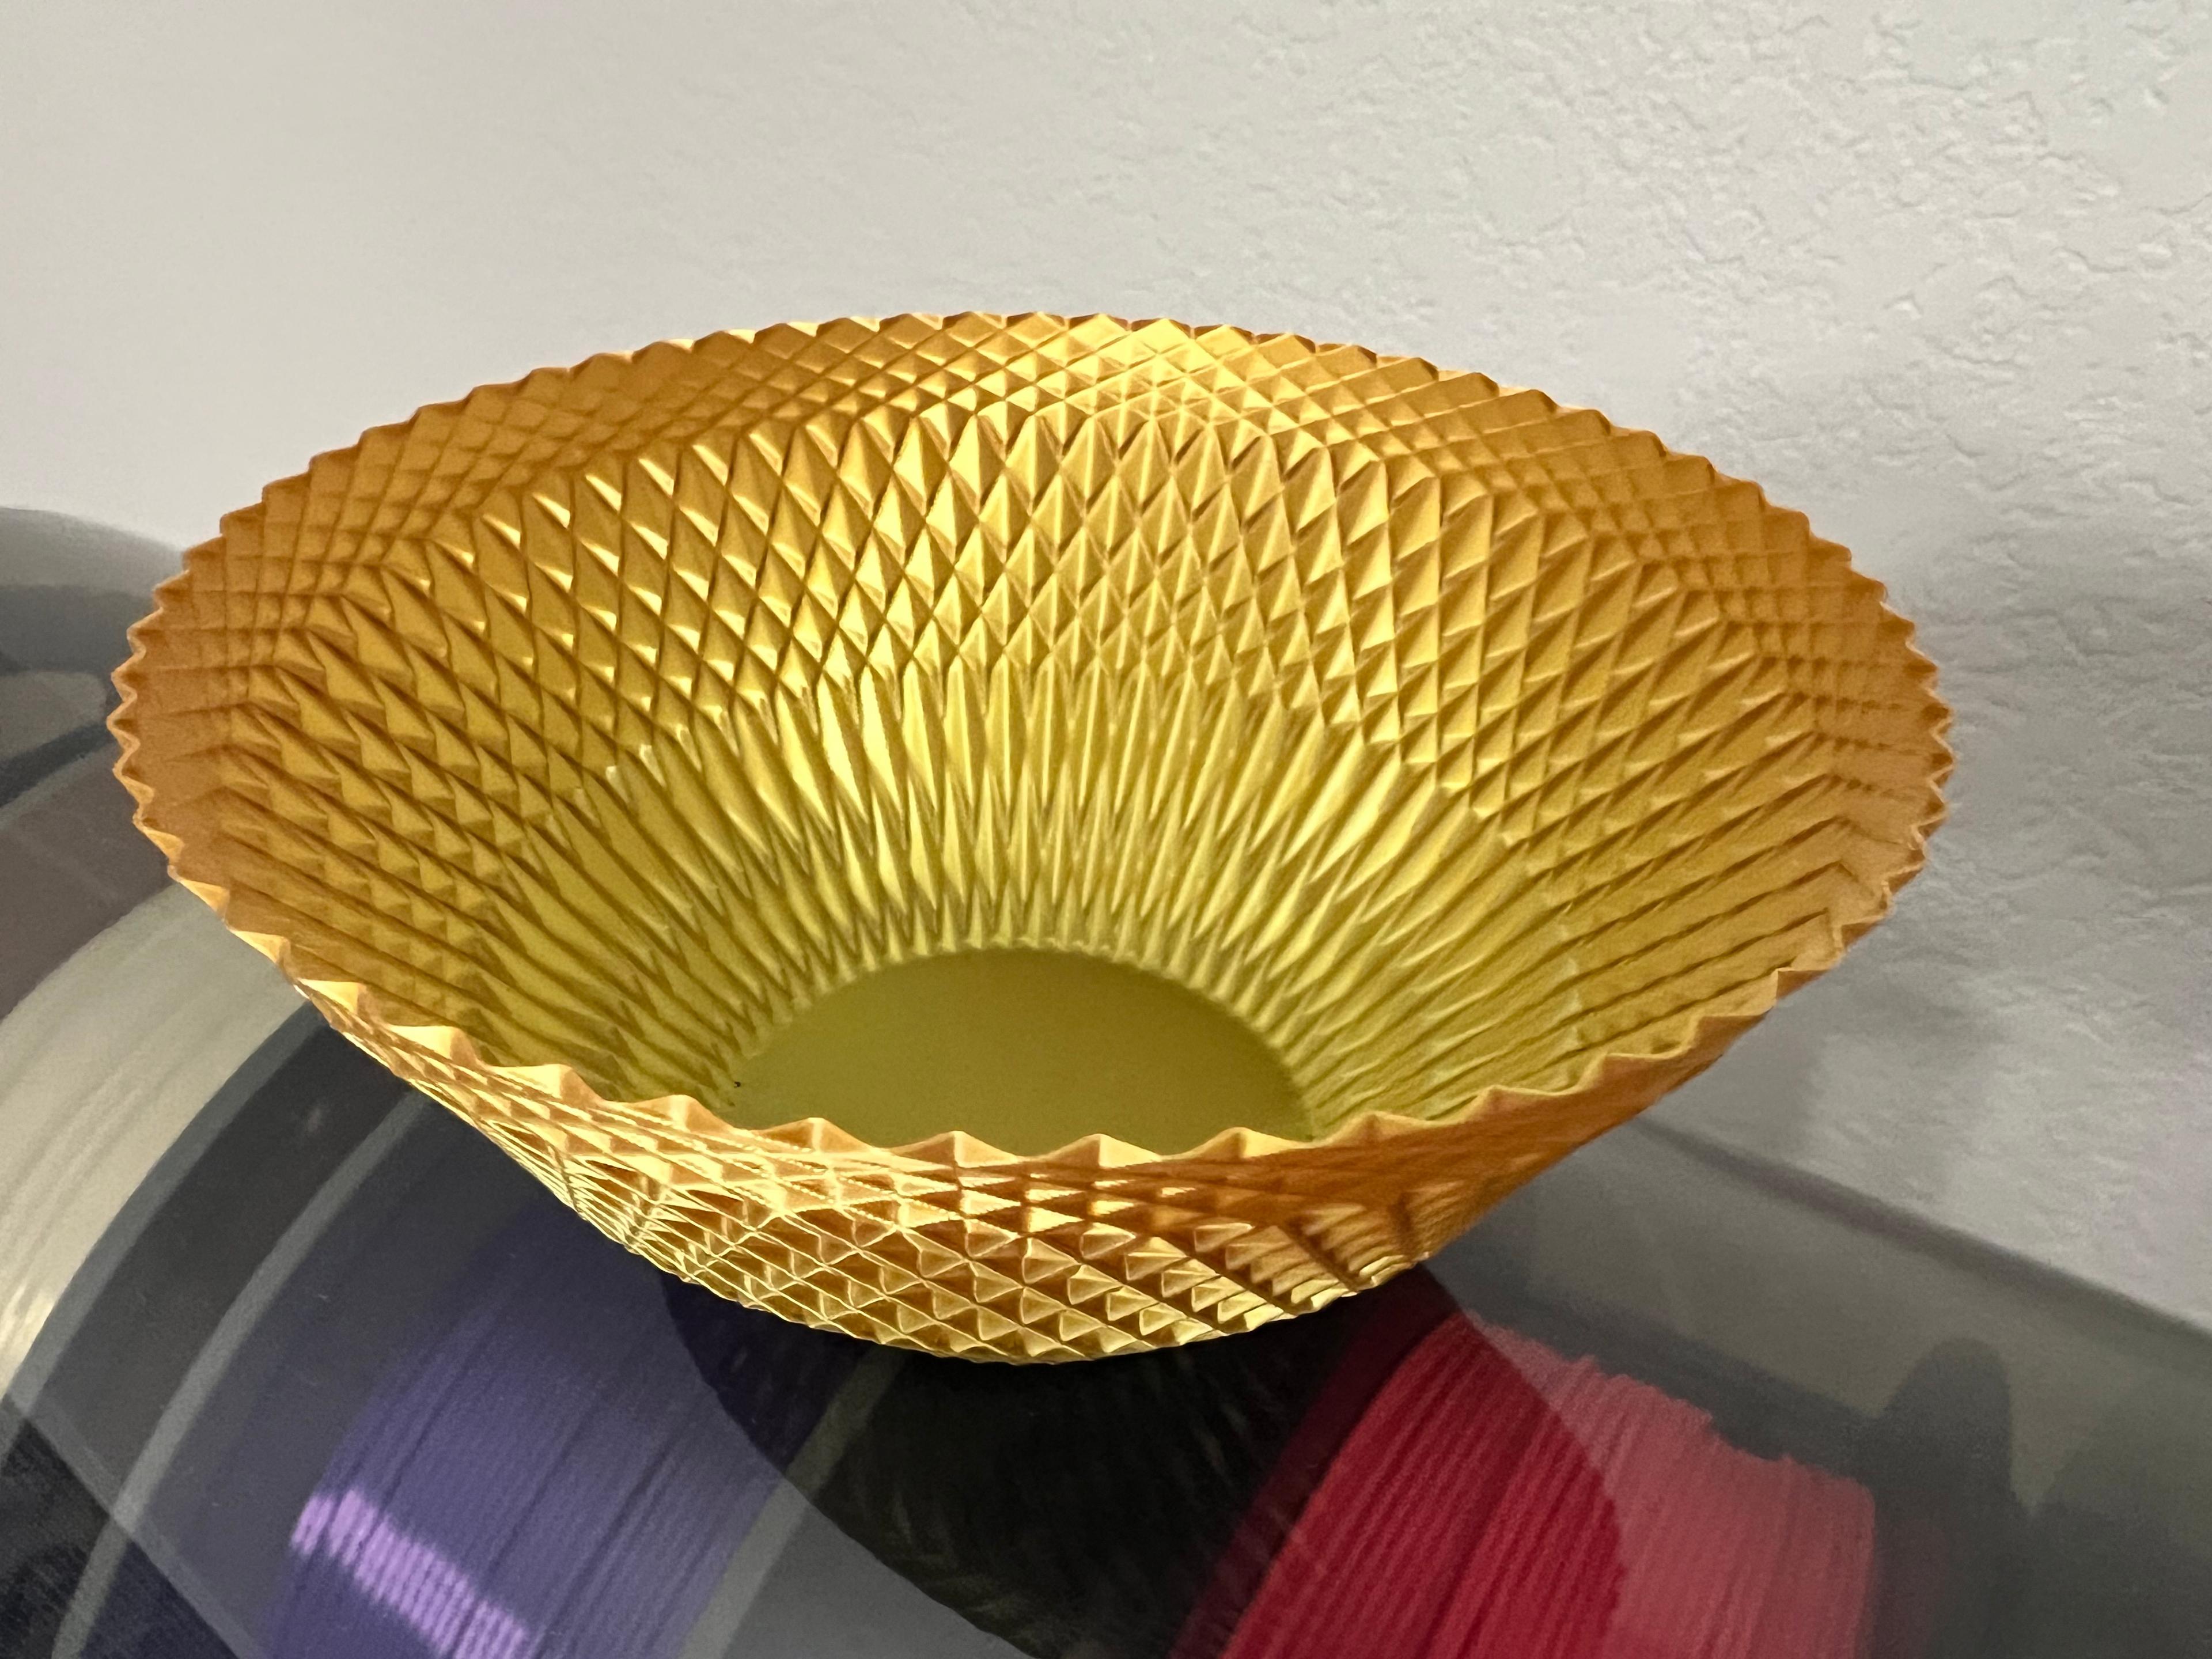 Bowl with Small Facets 3d model